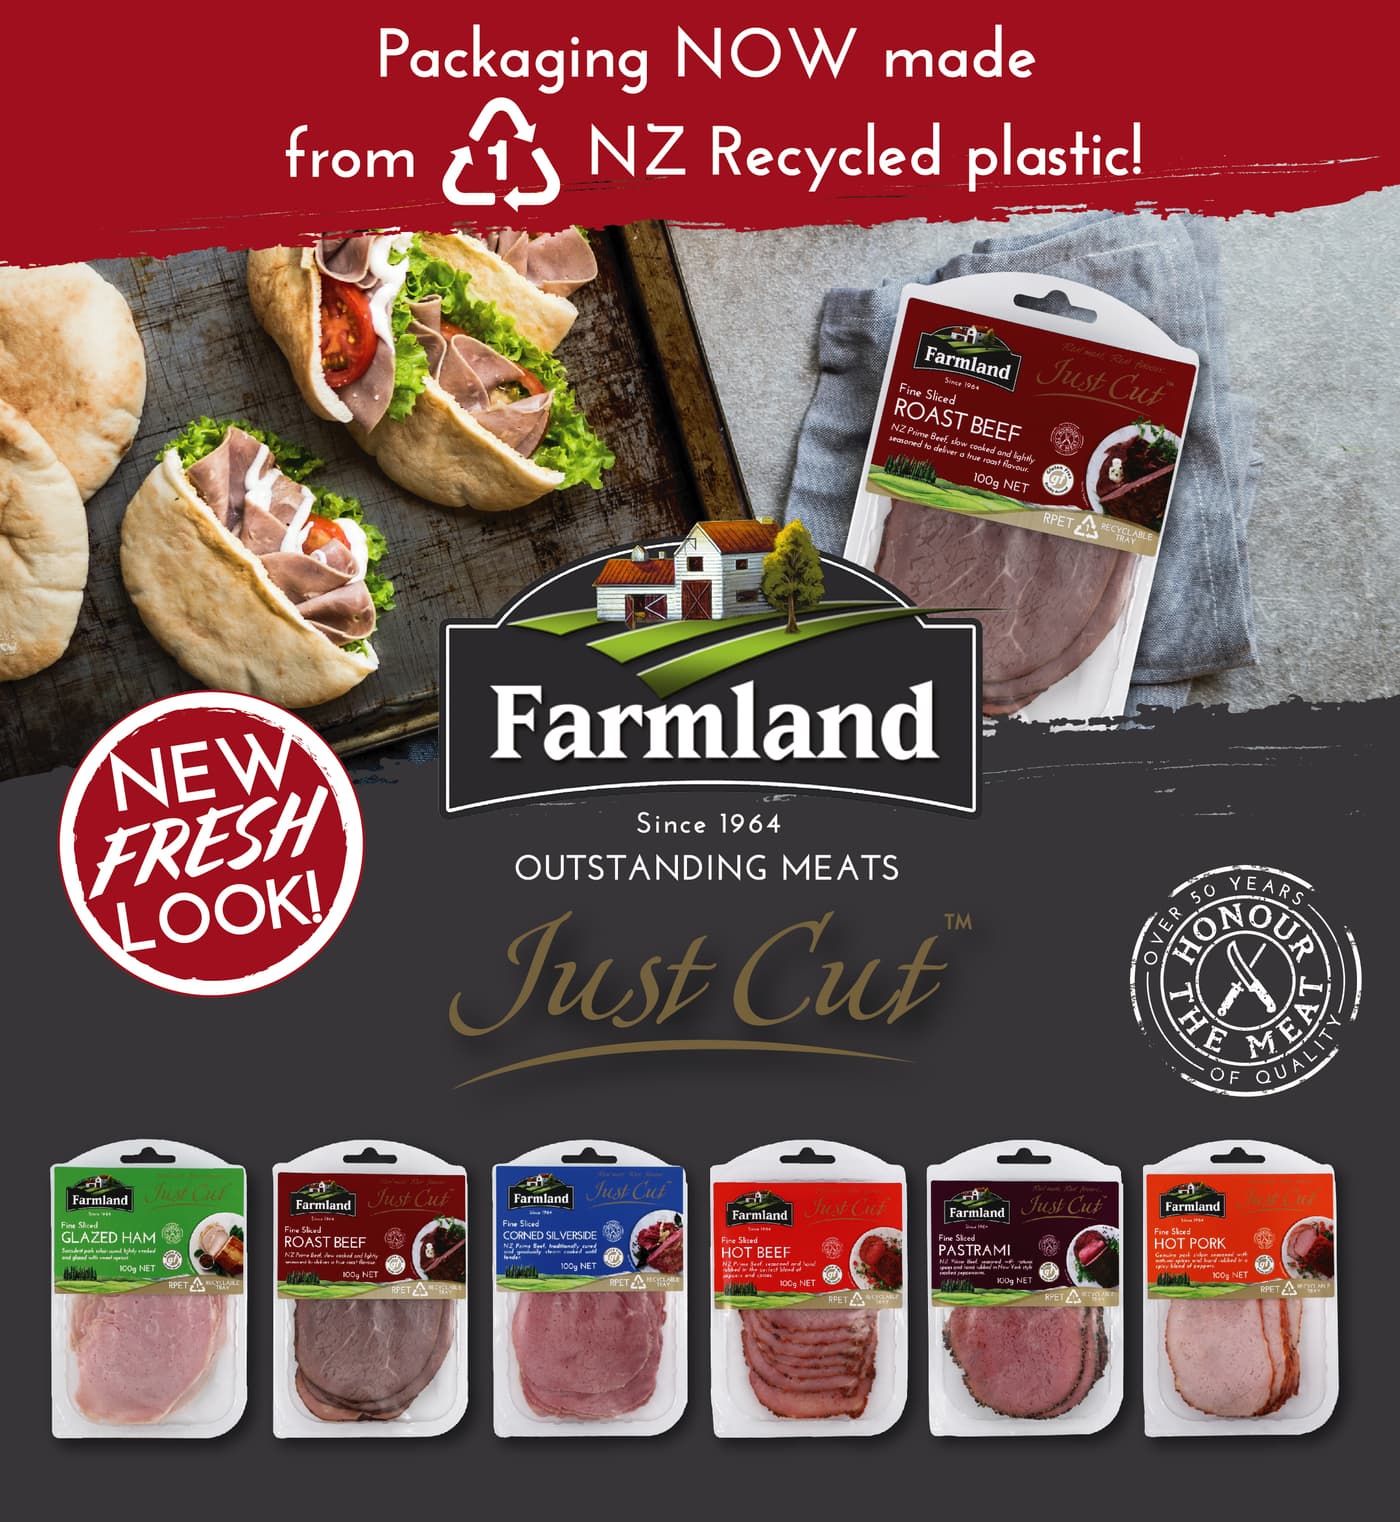 Fresh redesign of quality sliced meats while creating a more sustainable future for NZ…